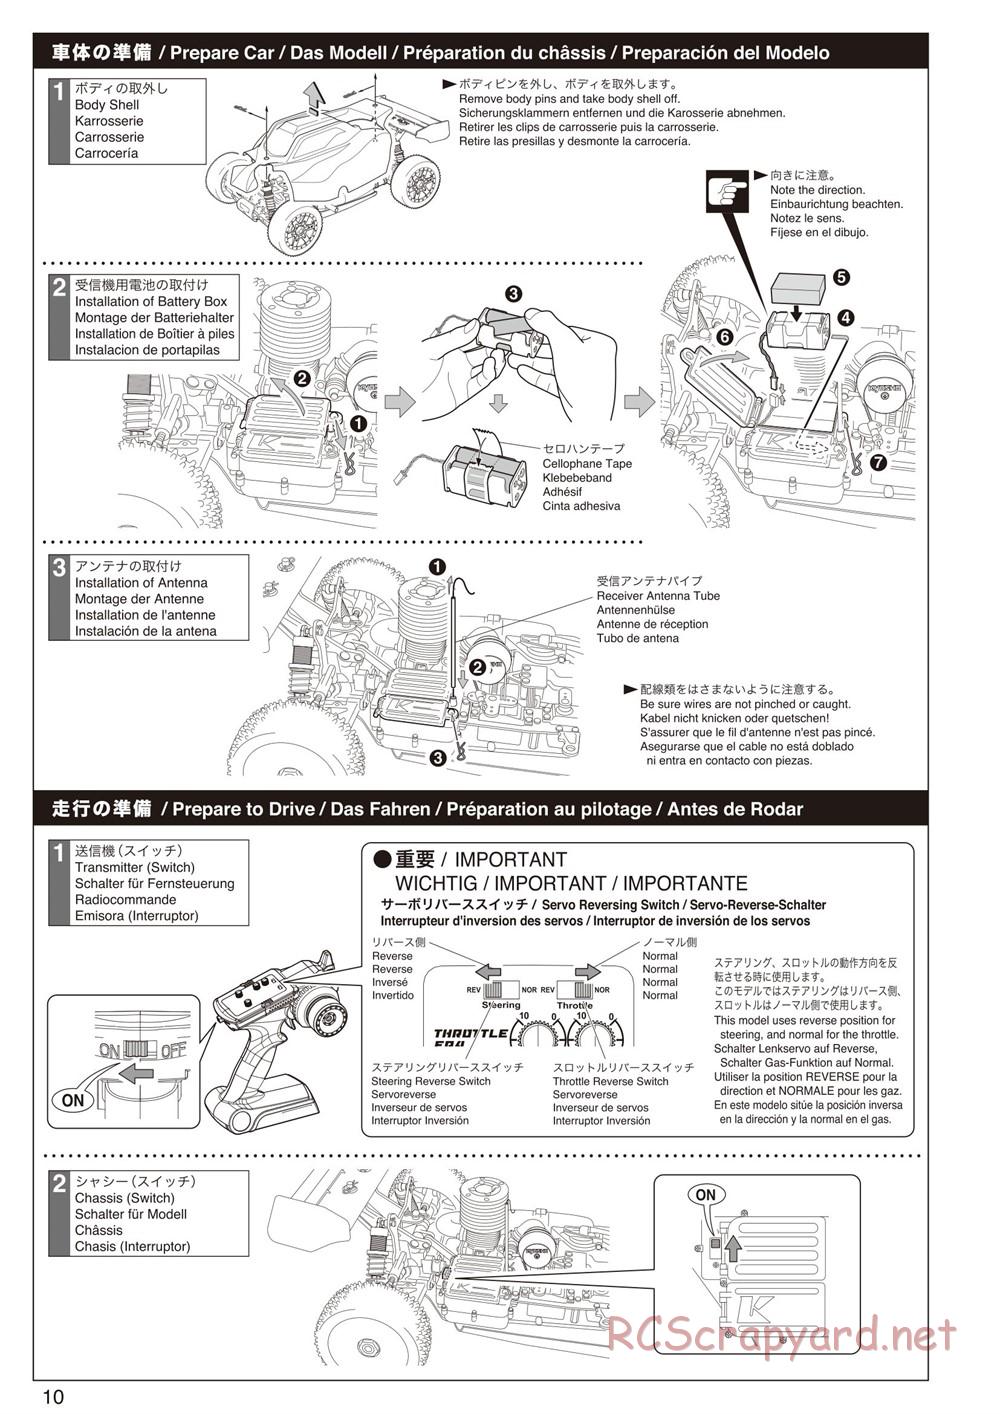 Kyosho - Inferno Neo 2.0 - Manual - Page 10